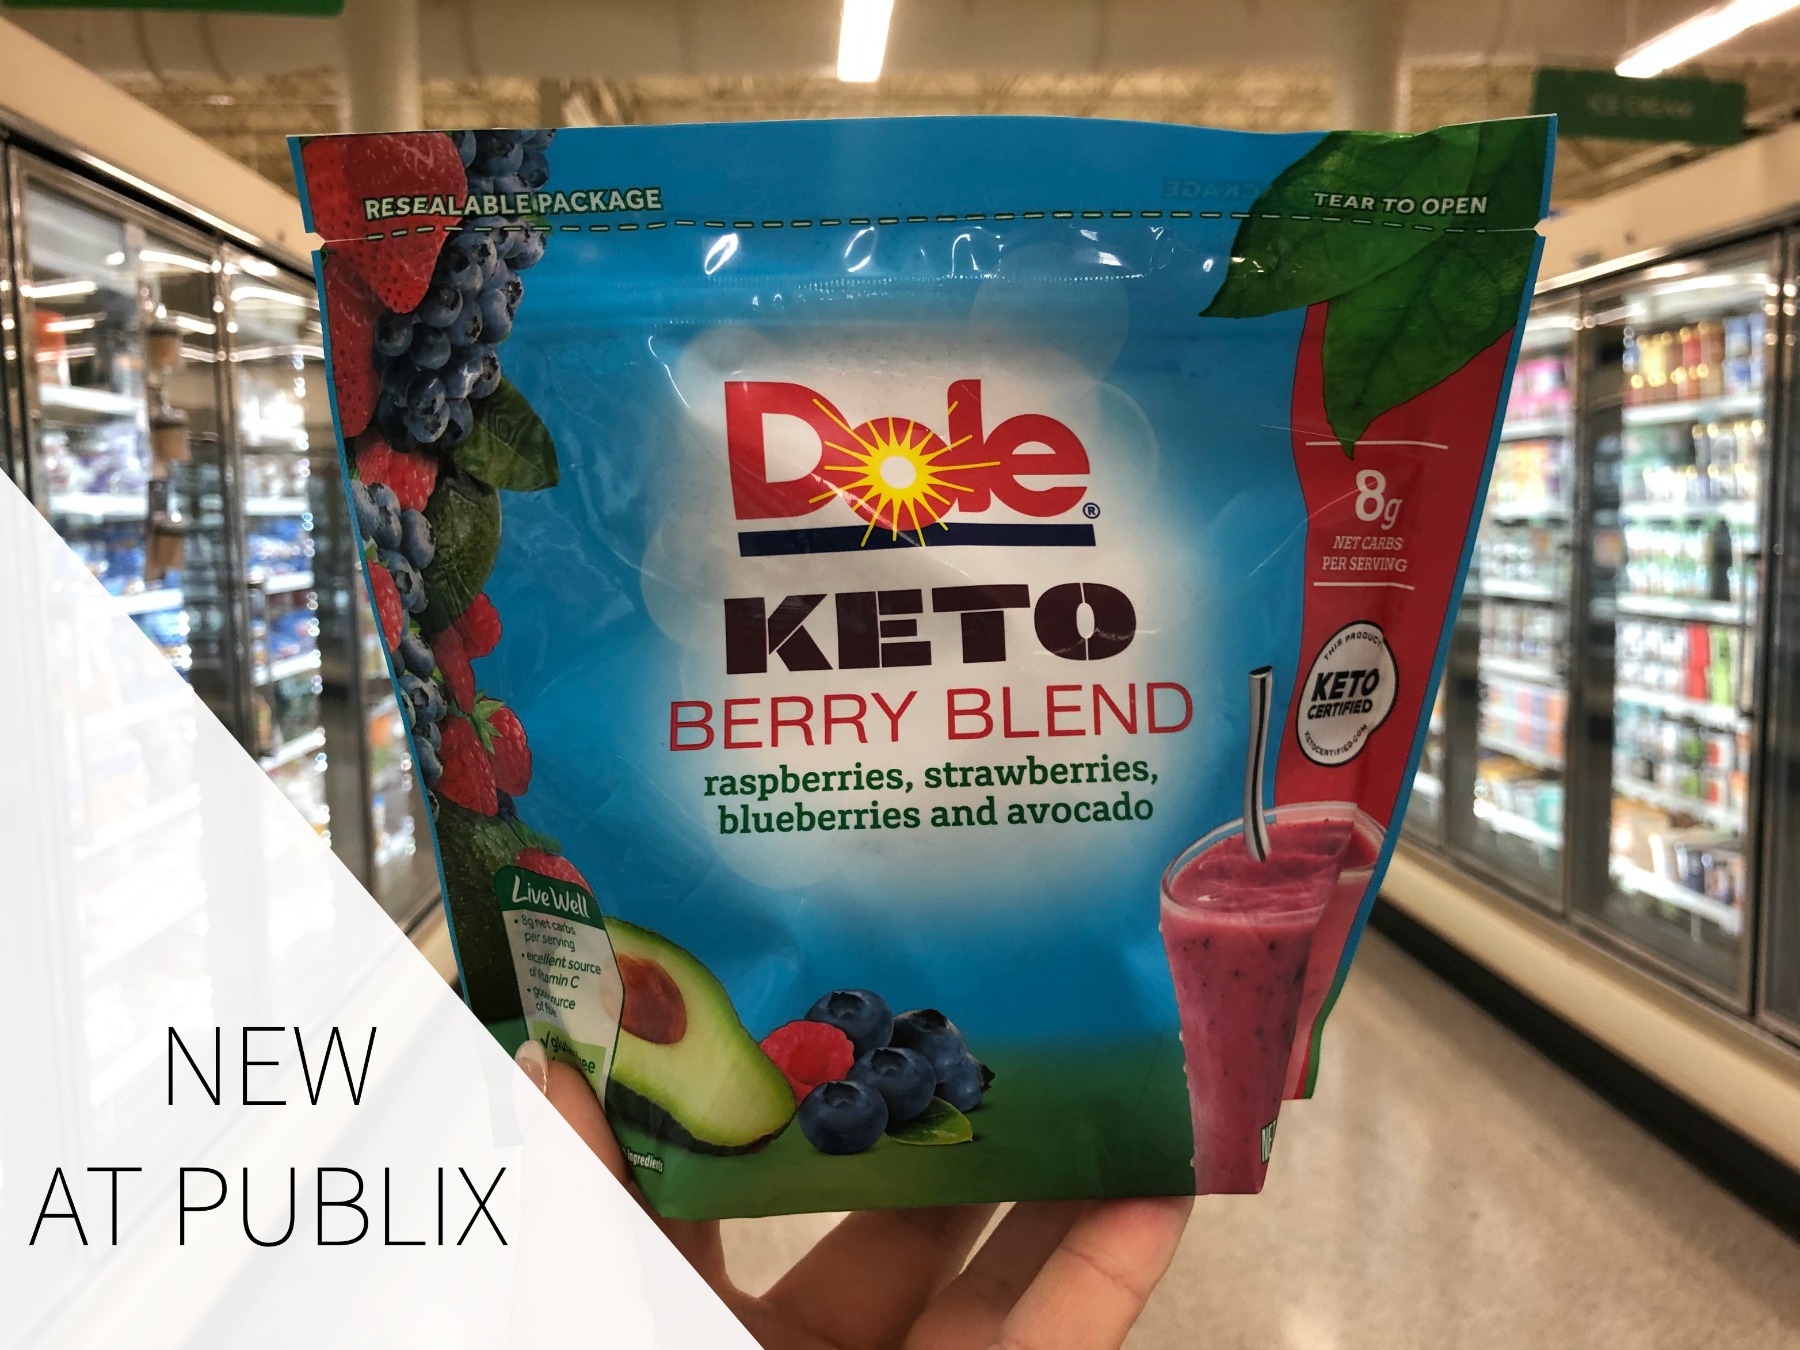 Find New Dole® Keto Berry Blend At Your Local Publix on I Heart Publix 1